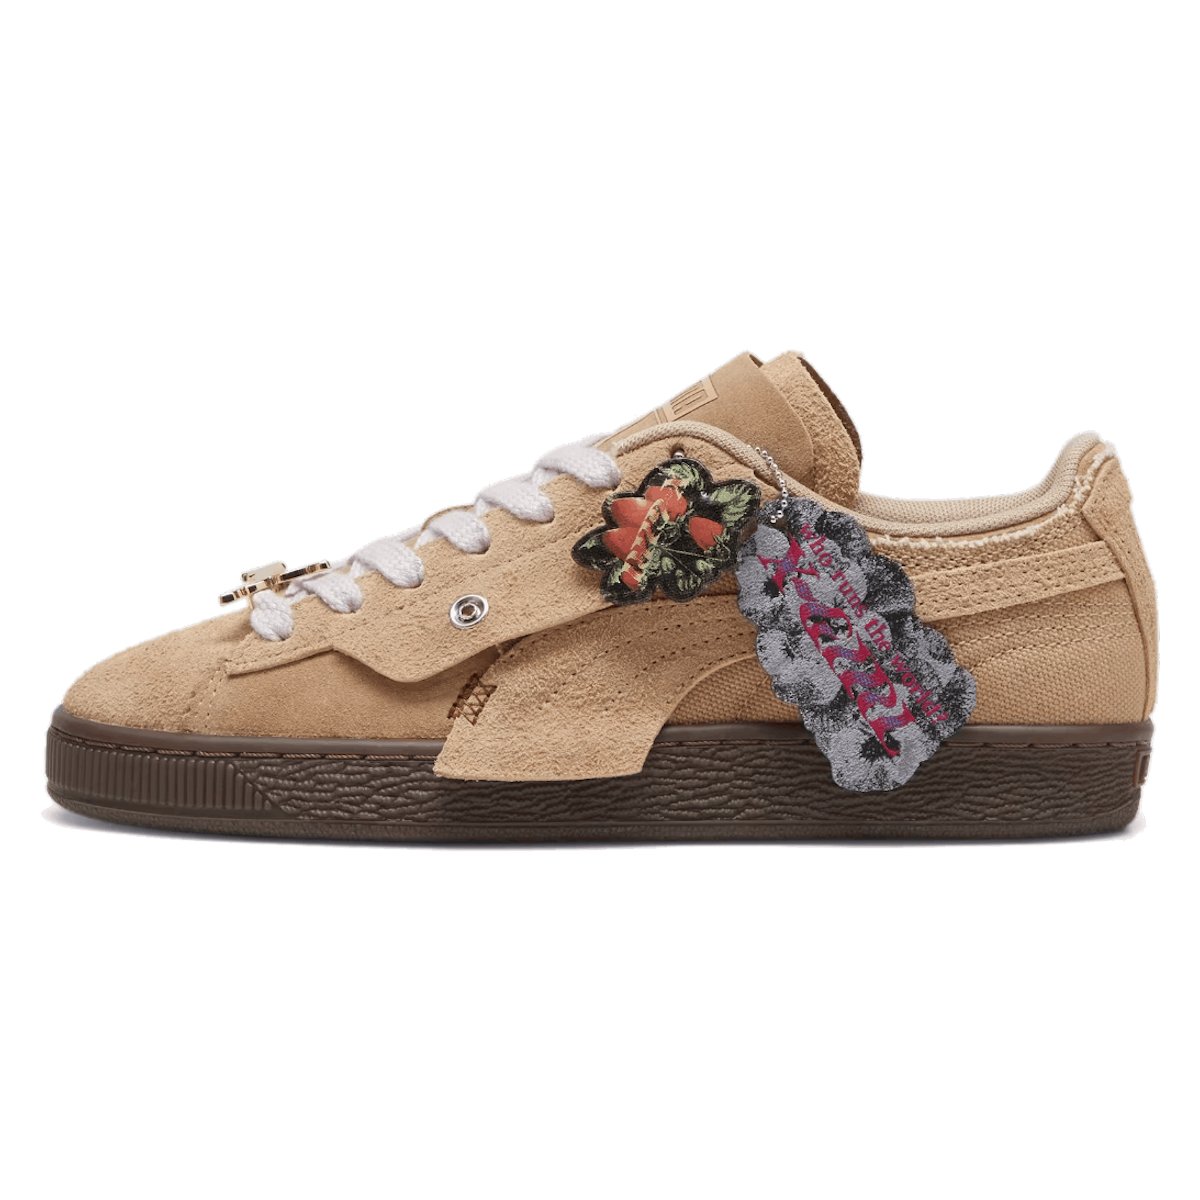 X-Girl x Puma Suede "Toasted Almond"